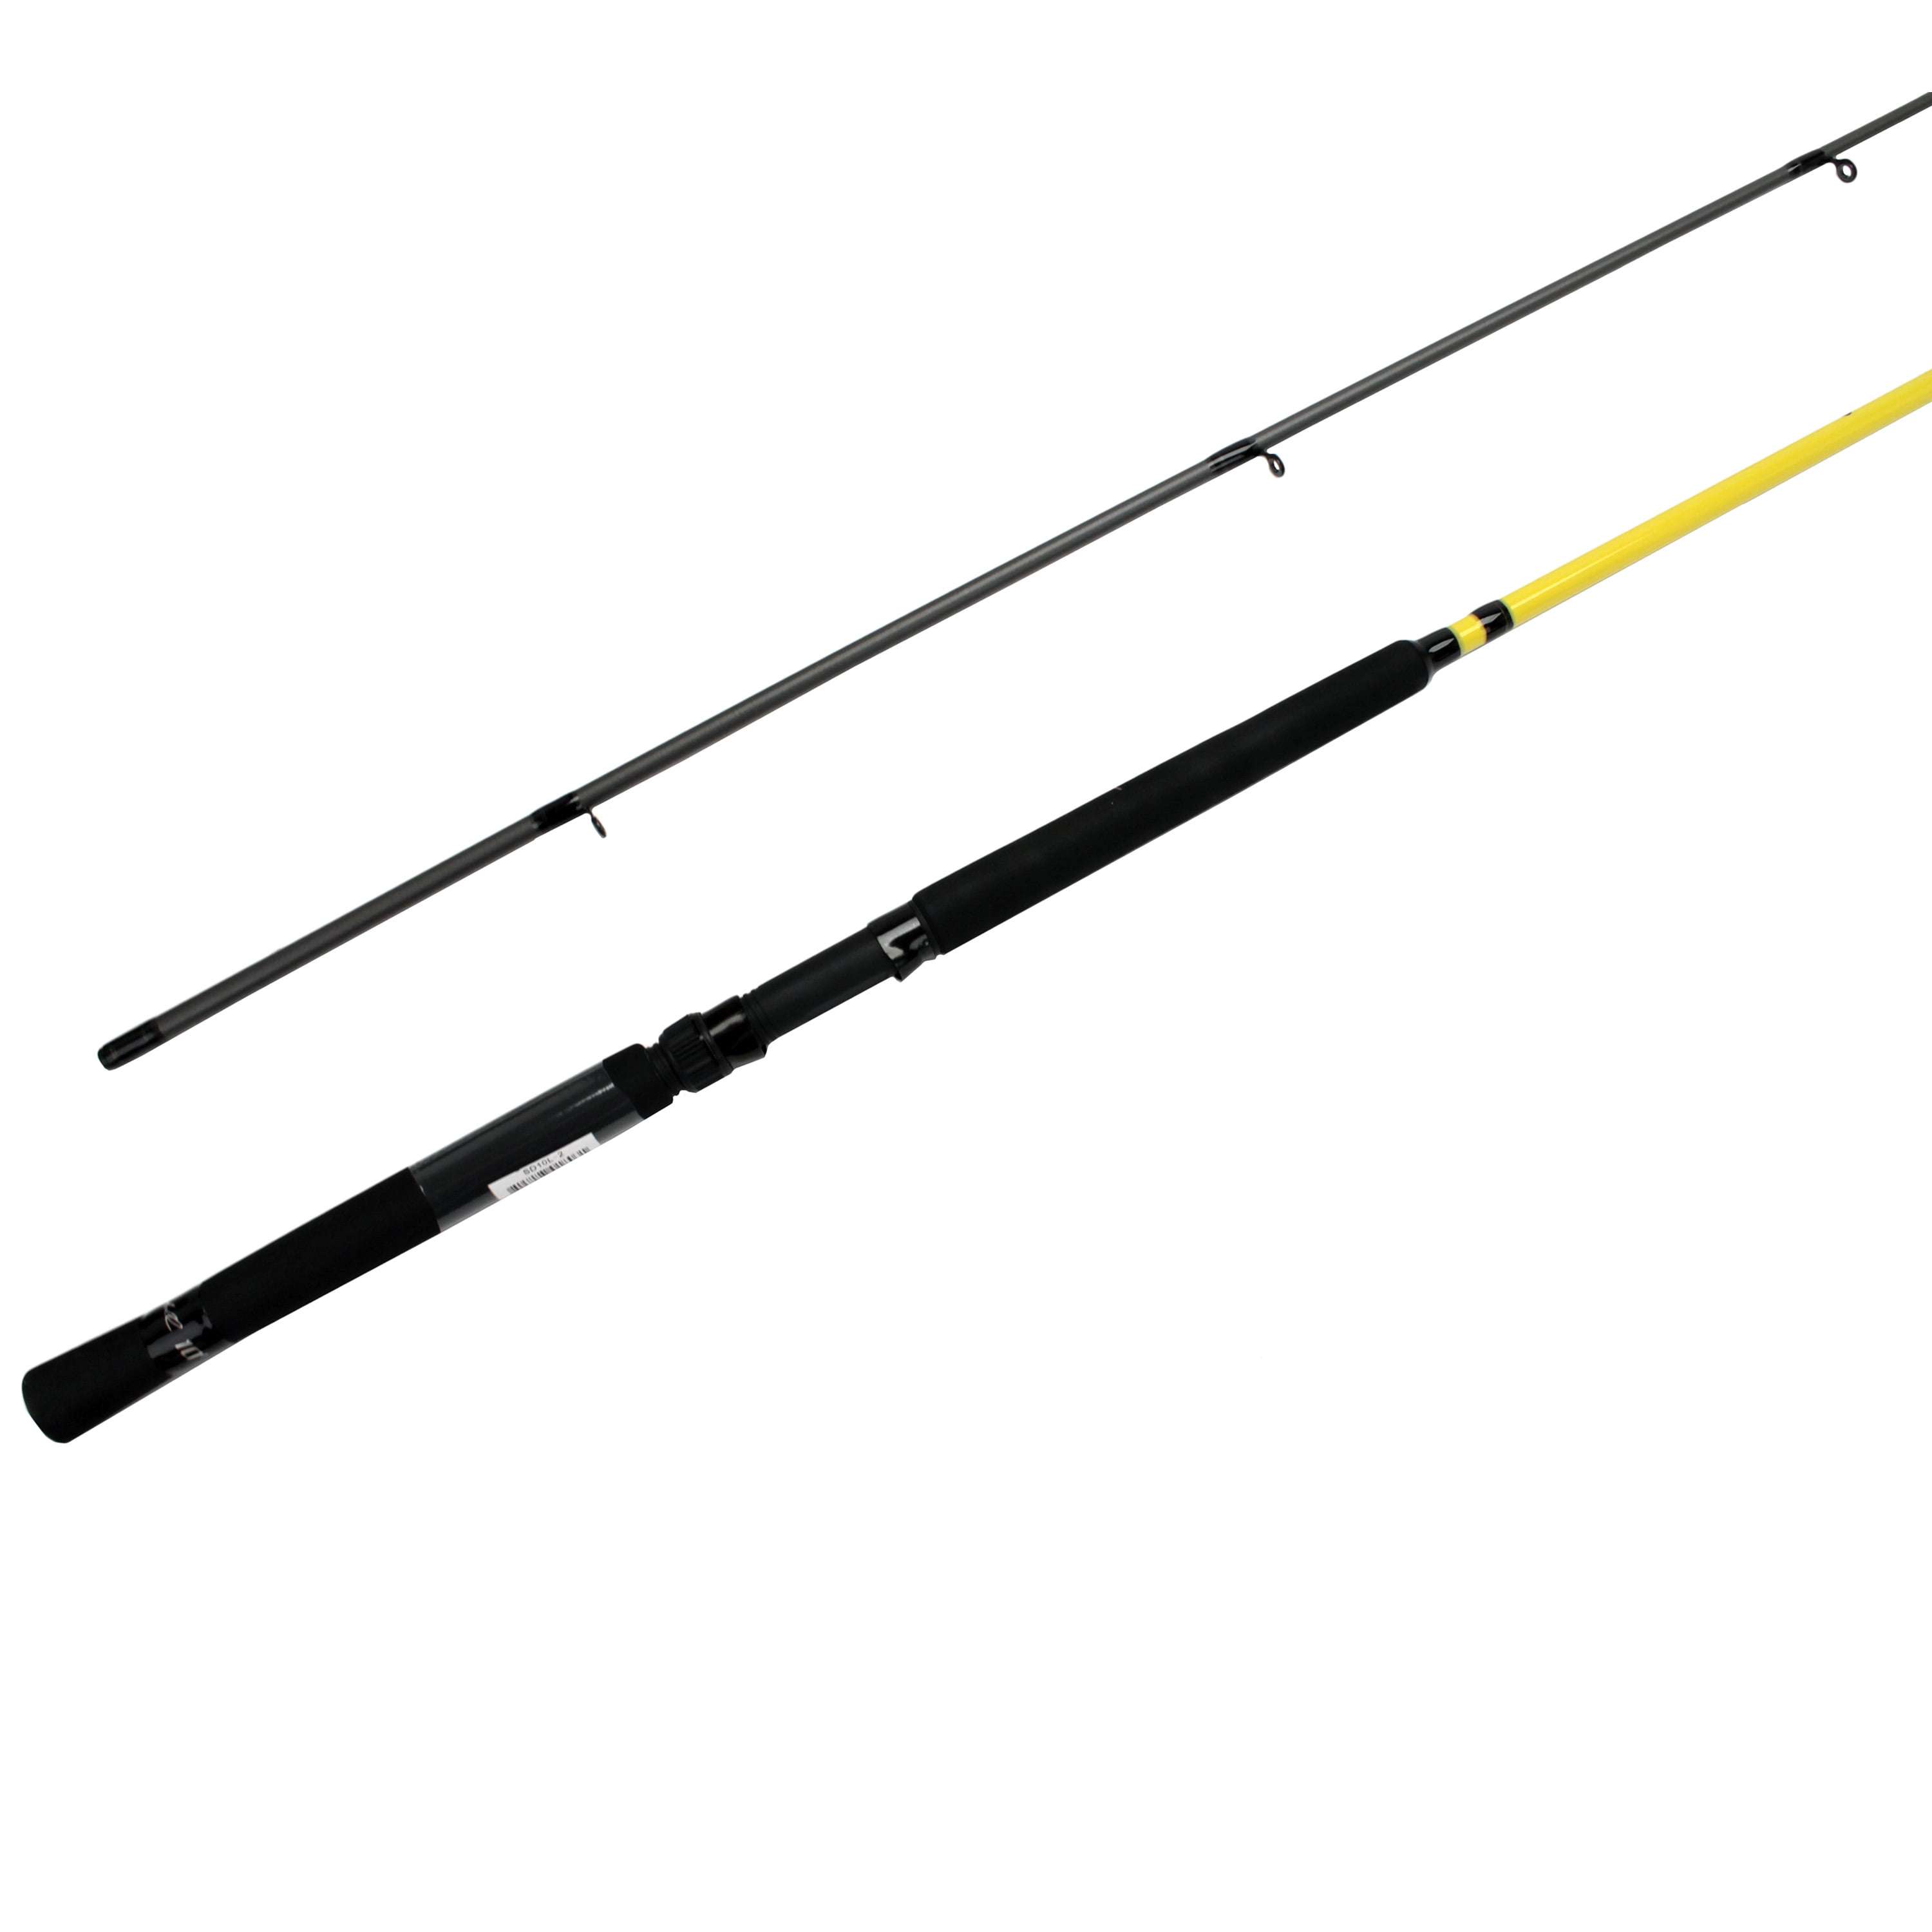 1 SET OF FOUR Lew's MR ROD 10' SD10L-2 CRAPPIE SLAB DADDY  FISHING POLES 